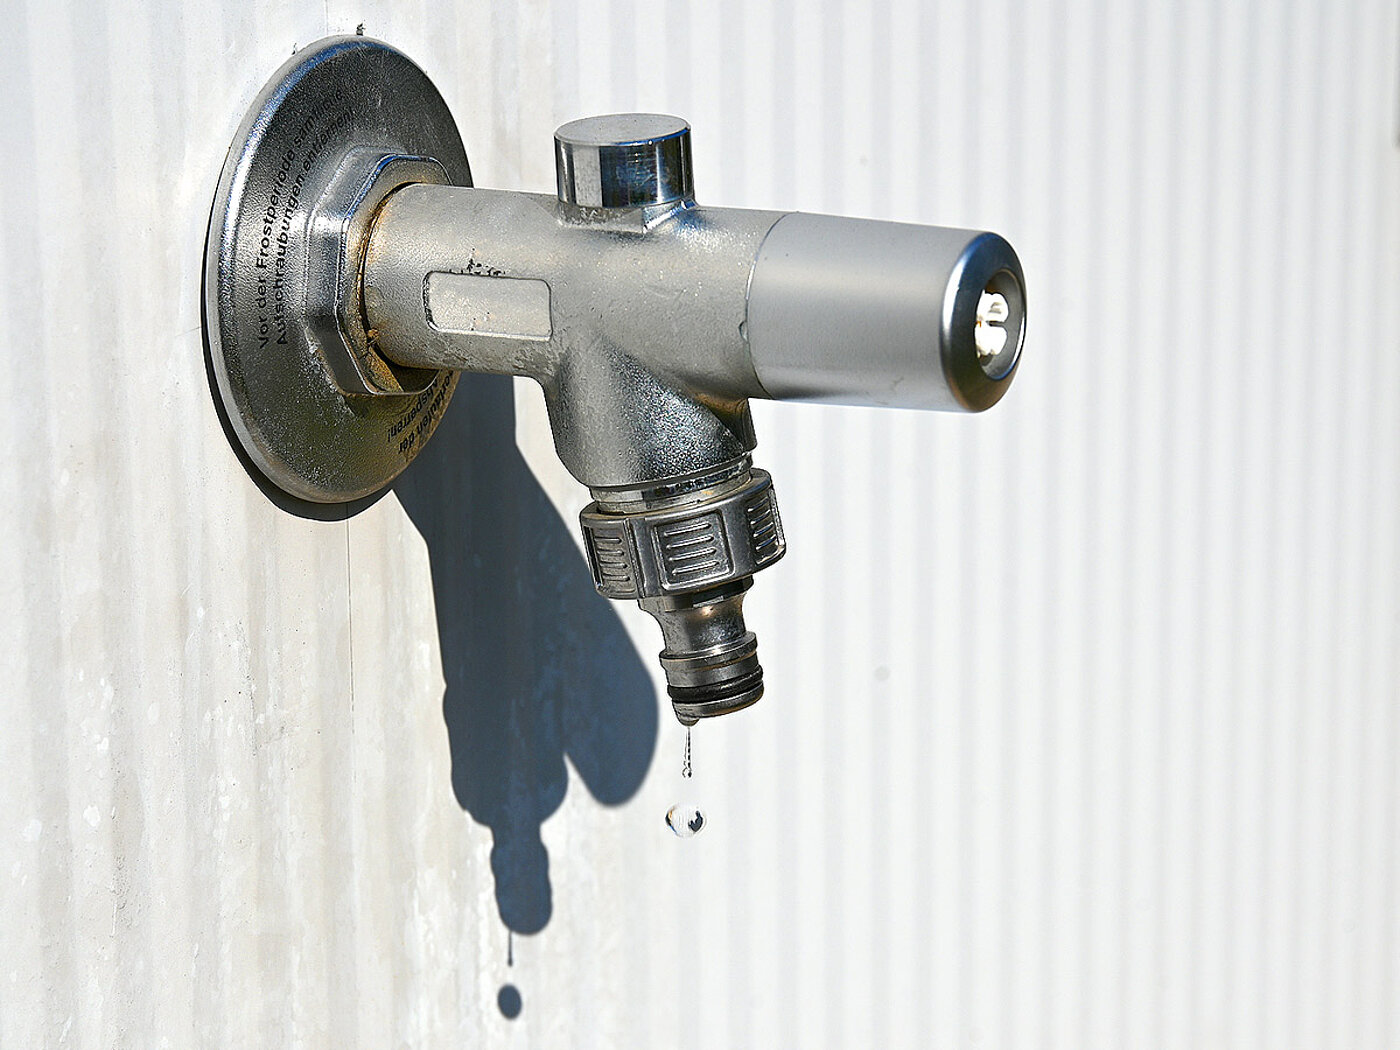 a water tap made of silvery-shining metal, fixed to a grey striped panel wall, with a drop of water dripping from the hose connector